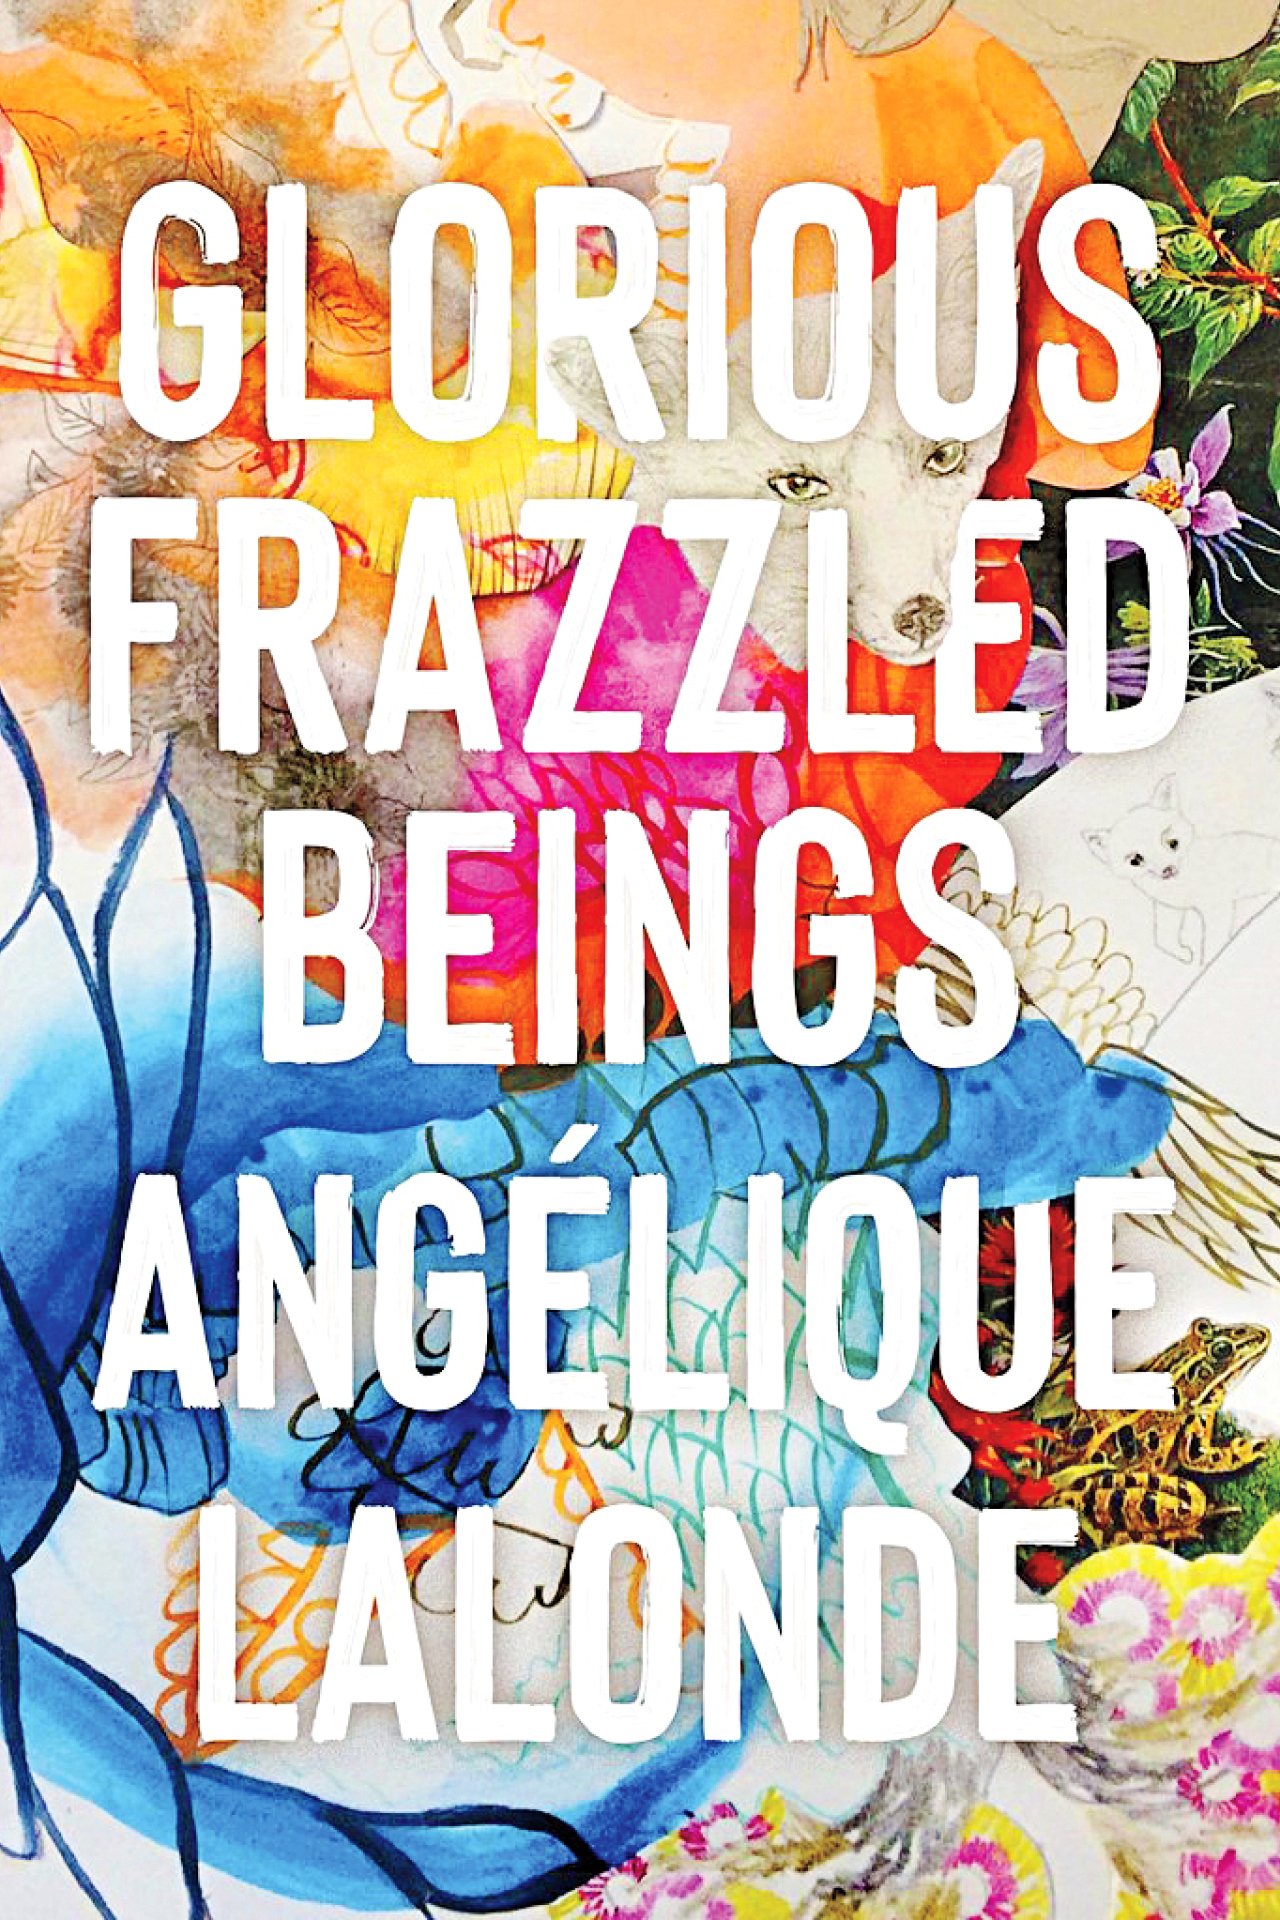 Glorious frazzled beings by Angelique Lalonde